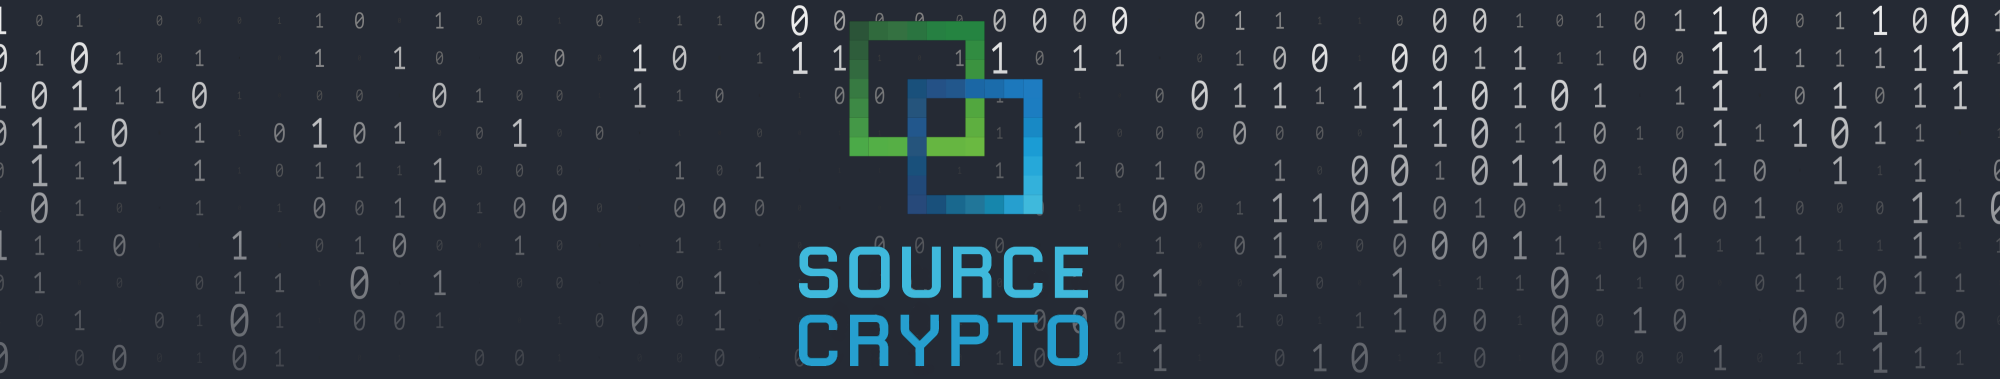 SourceCrypto Research-Index